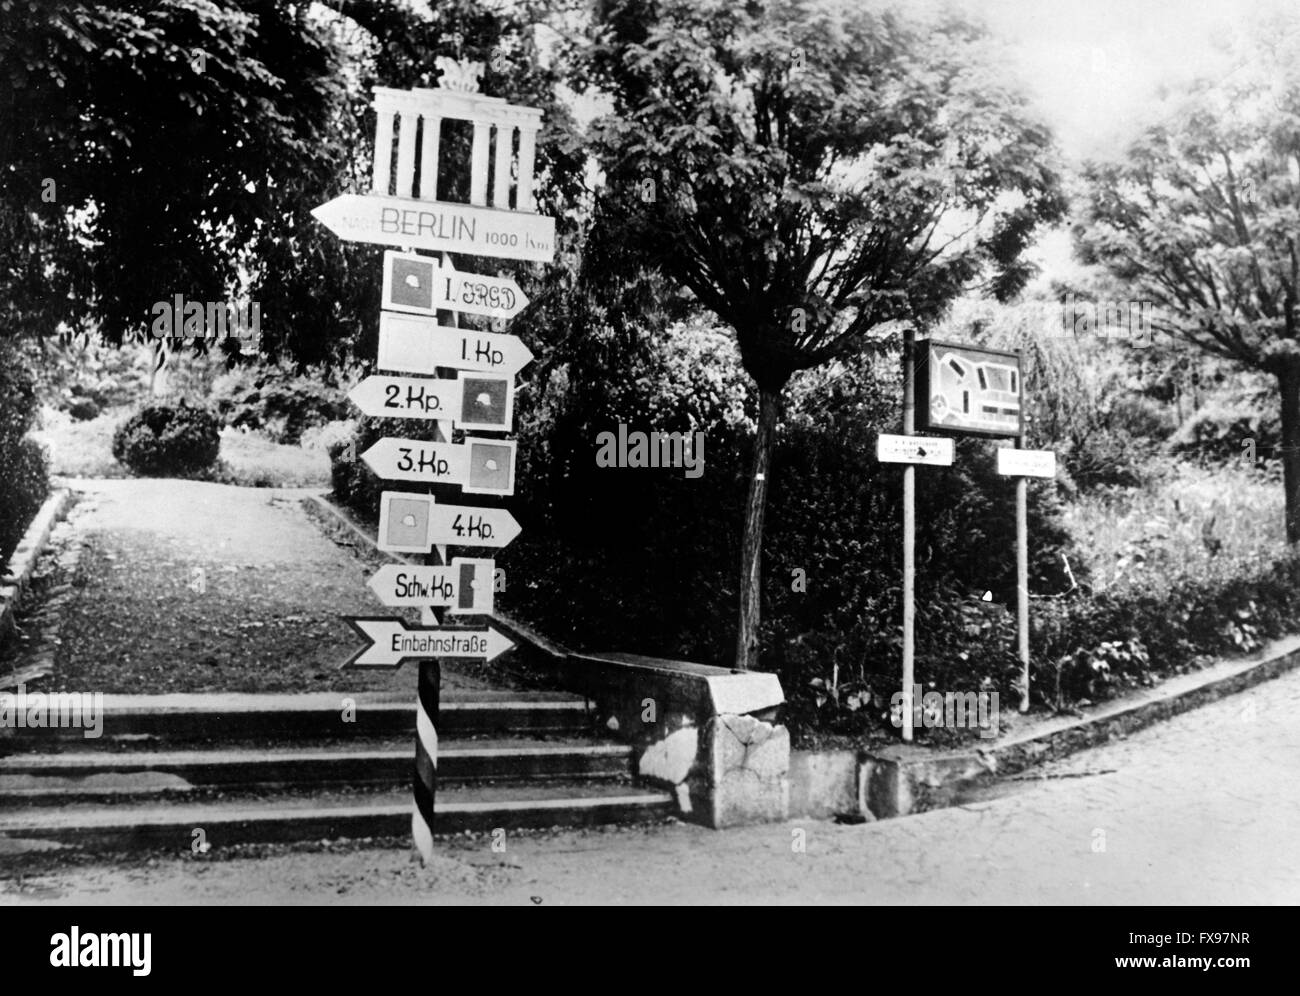 The Nazi propaganda image depicts a signpost in Yugoslavia with the inscription 'Berlin 1000 km' underneath an image of the Brandenburger Tor (Brandenburg Gate). The photo was published in May 1941. Fotoarchiv für Zeitgeschichtee - NO WIRE SERVICE - Stock Photo